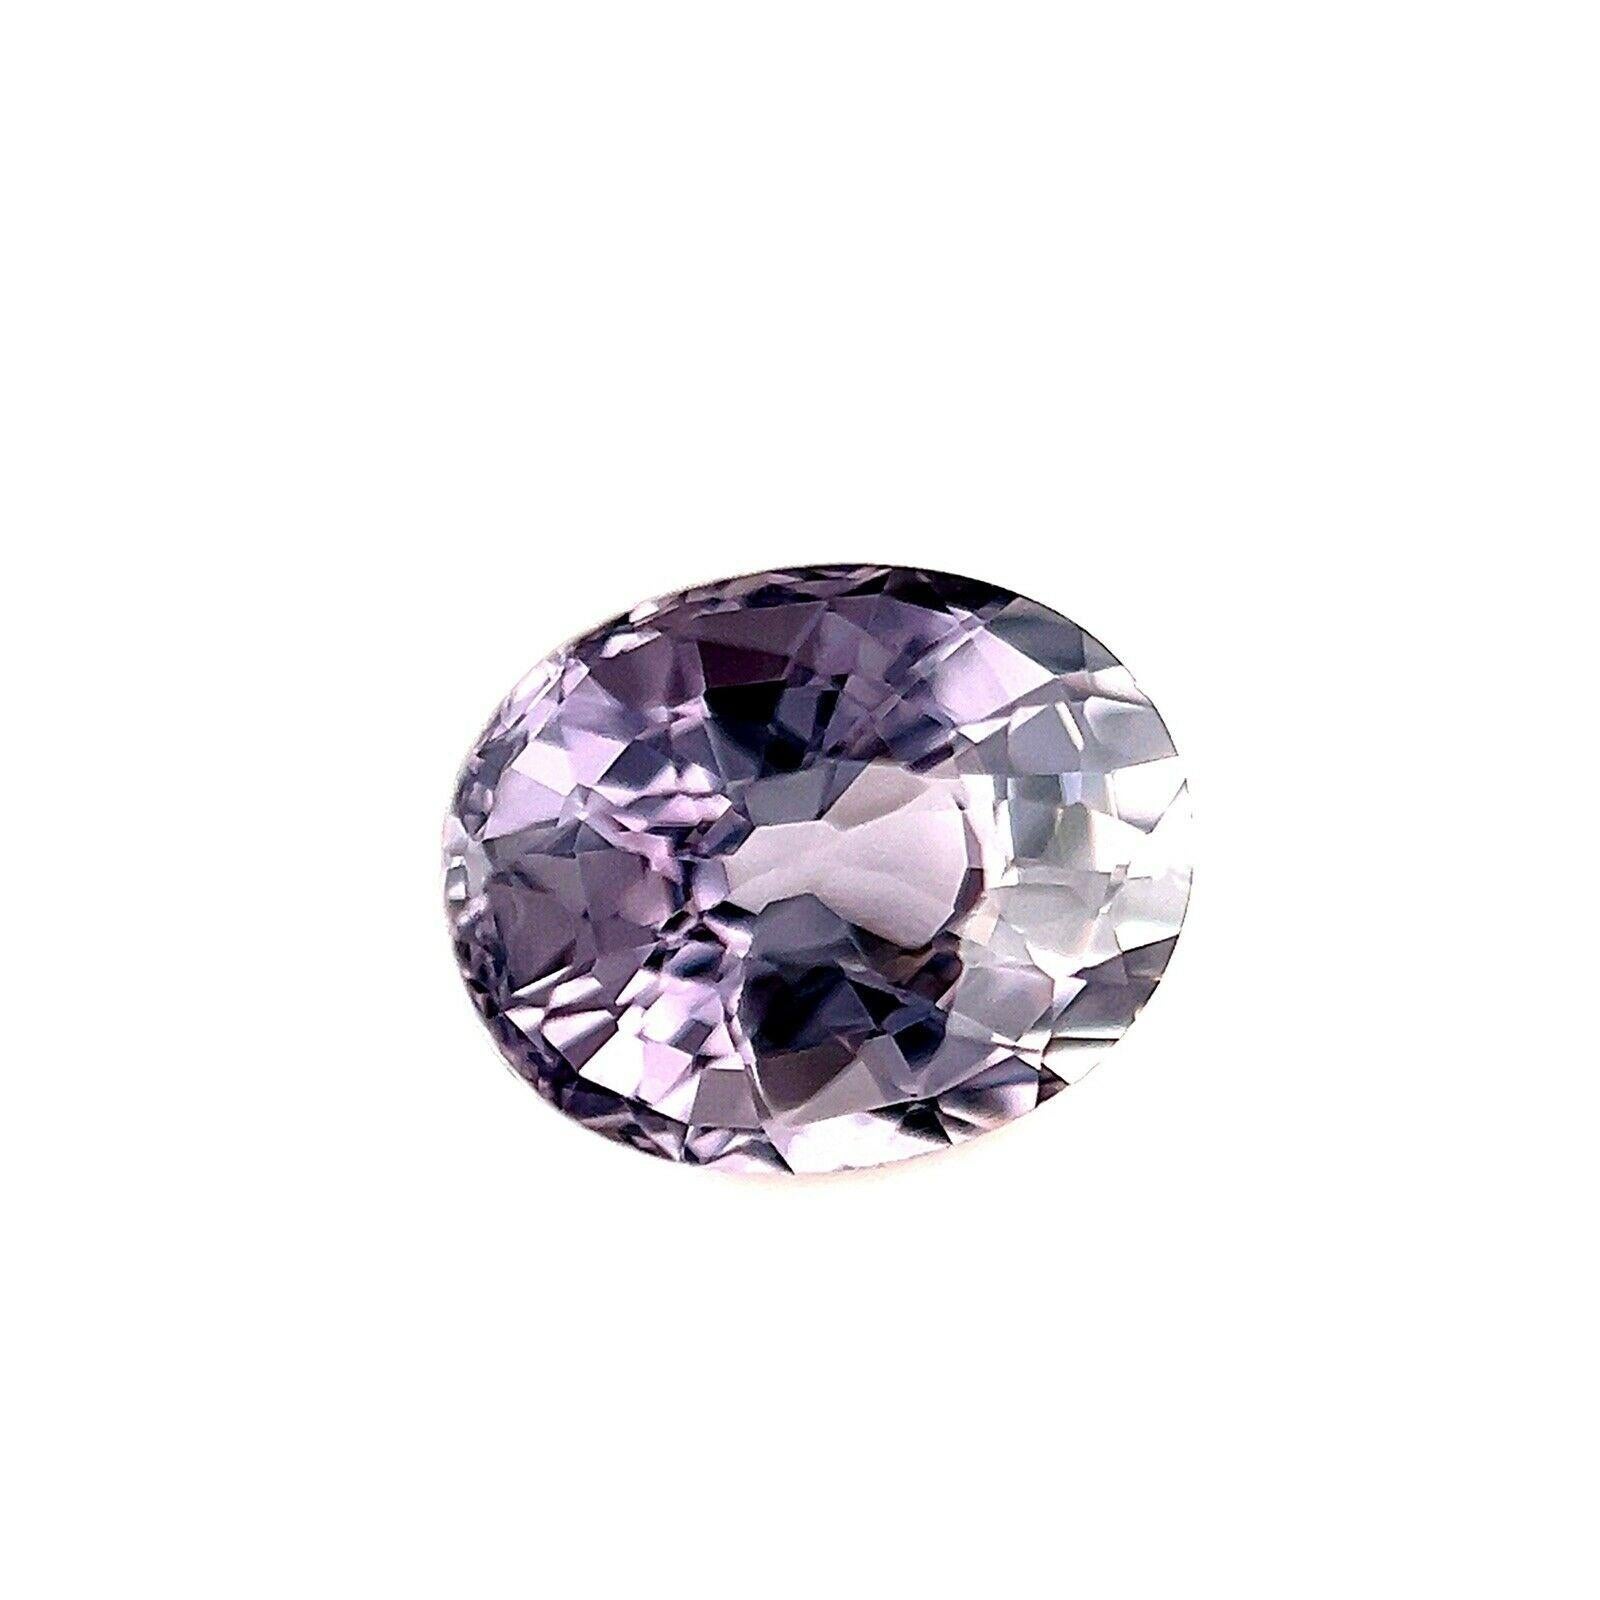 Fine Titanium Purple Natural Spinel 1.72ct Oval Cut 7.4x6mm Loose Rare Gem

Natural Purple ‘Titanium’ Spinel Gemstone.
Beautiful 1.72 Carat spinel with a fine grey purple colour , often called ‘titanium’ in the trade. This spinel also has excellent